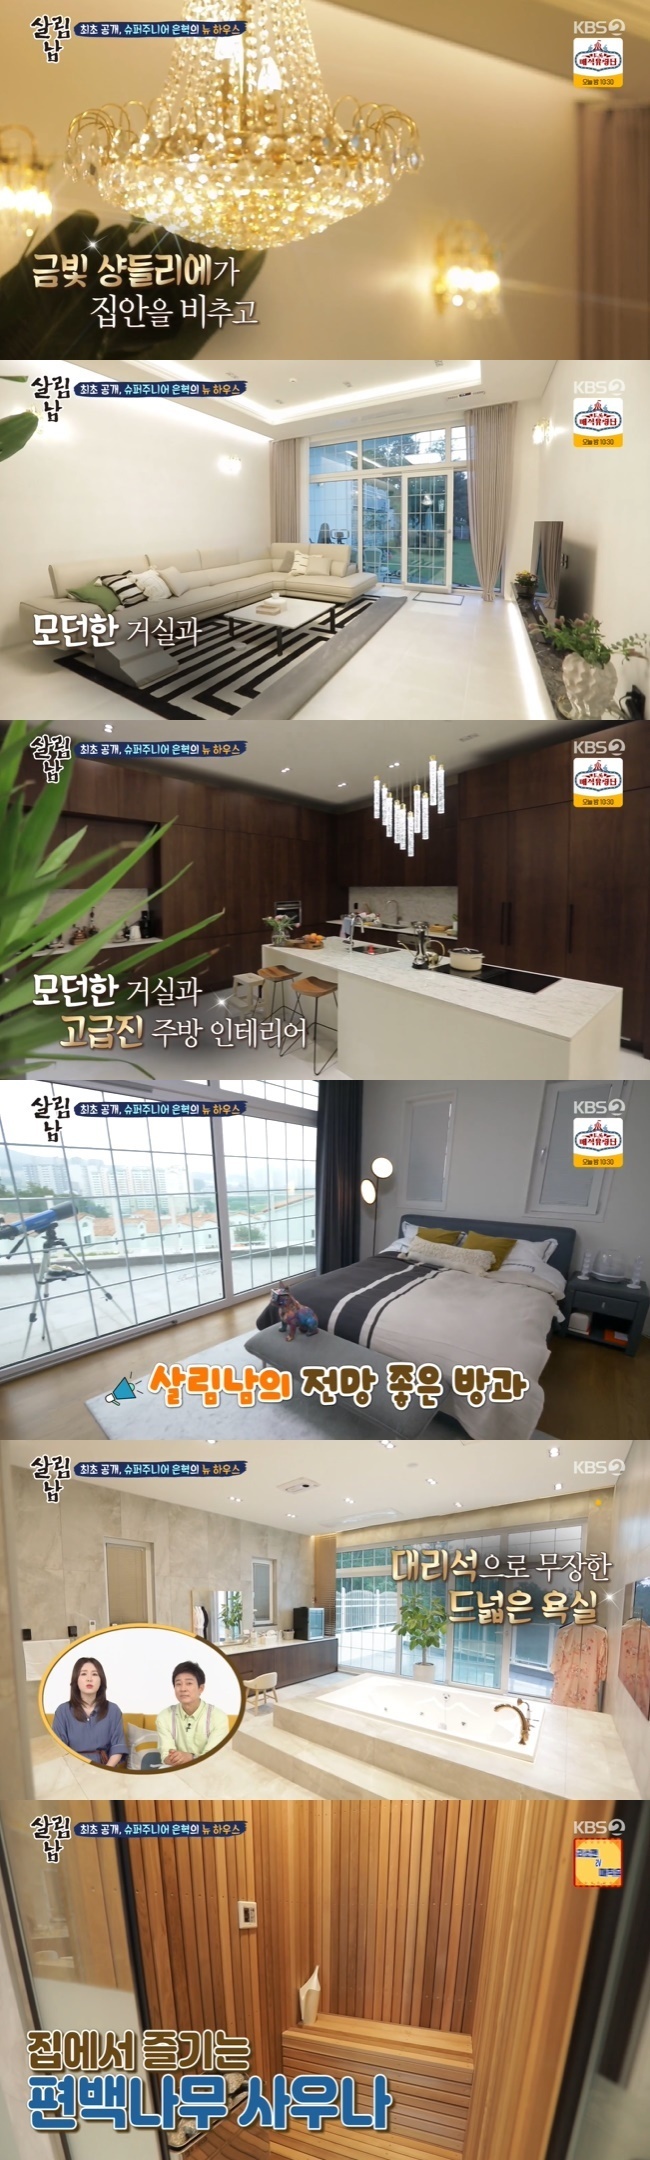 Super Junior Eunhyuk has unveiled a generous Yongin home for the Family.On KBS 2TVs Season 2 of Living Men, which aired on June 19, Super Junior Eunhyuk joined as a new Salimnam.Opening to the sound of his fathers bell, Eunhyuk opened the electric curtains and started the morning, the house at the top of the townhouse was a two-story, single-family house with an area of 264.4 square meters.I thought I should come together and live with the Family now, so I shook up my bankbook a little bit, said Eunhyuk, who owns the house himself.Inside the house, which passed through the picturesque wide garden, the luxurious interiors stood out.When I entered the entrance, I saw a modern living room, luxurious kitchen interiors, and a golden channelier.On the second floor was a room in the prospected Eunhyuk and a bedroom of parents with antique interiors.